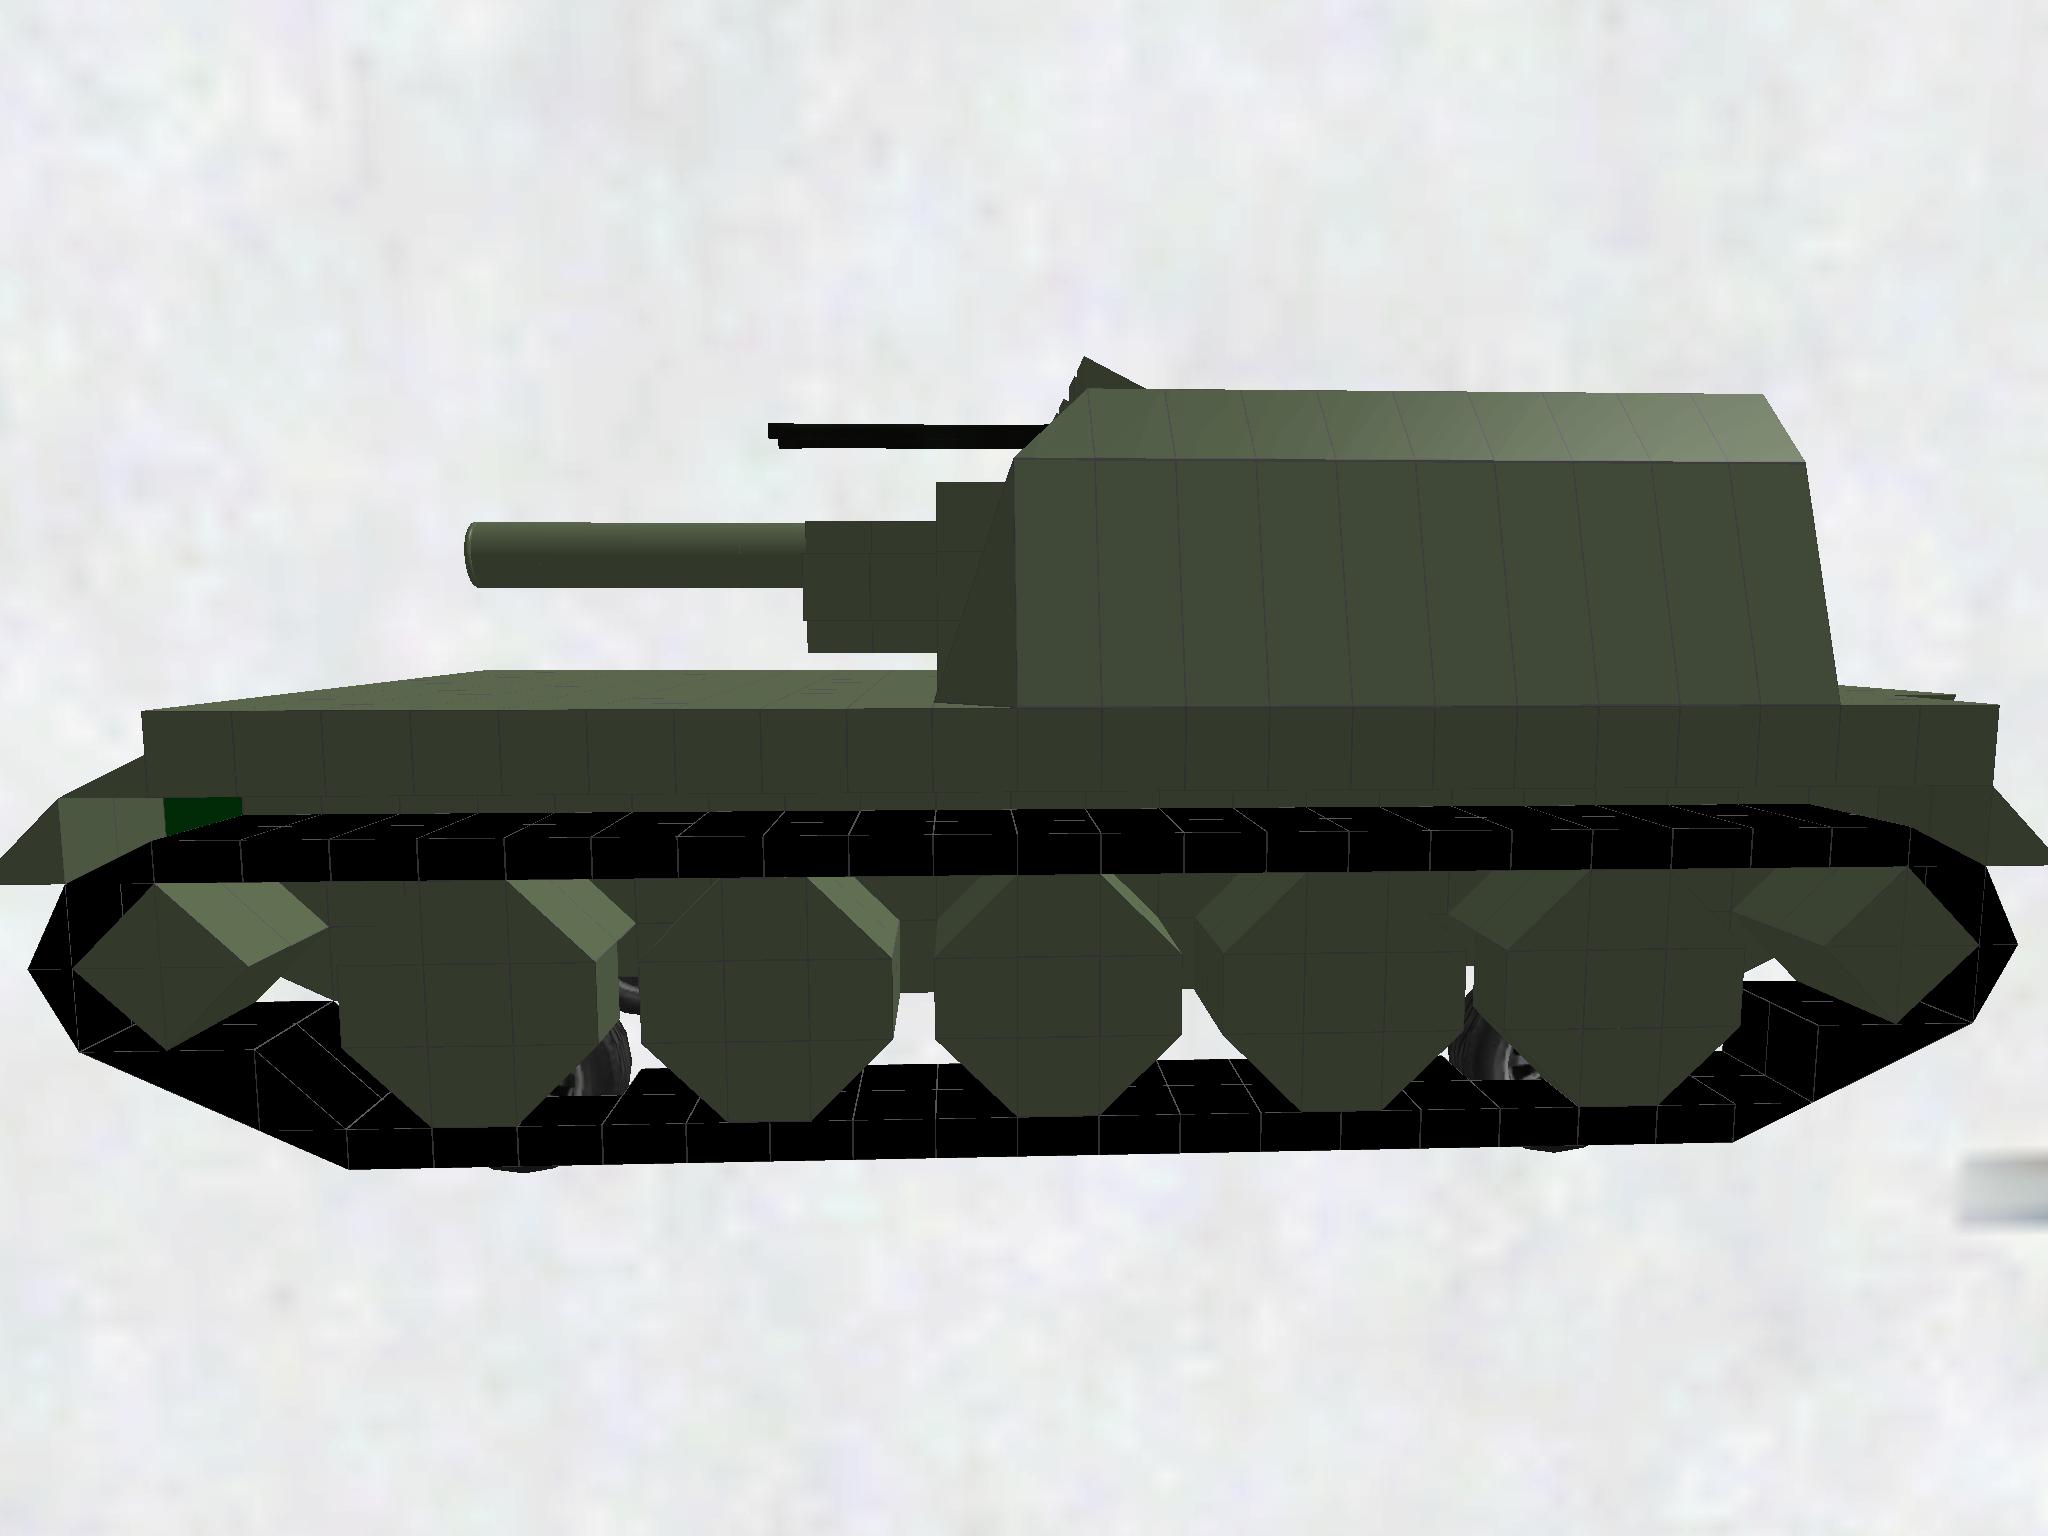 TANK DESTROYER FOR NEWBIES